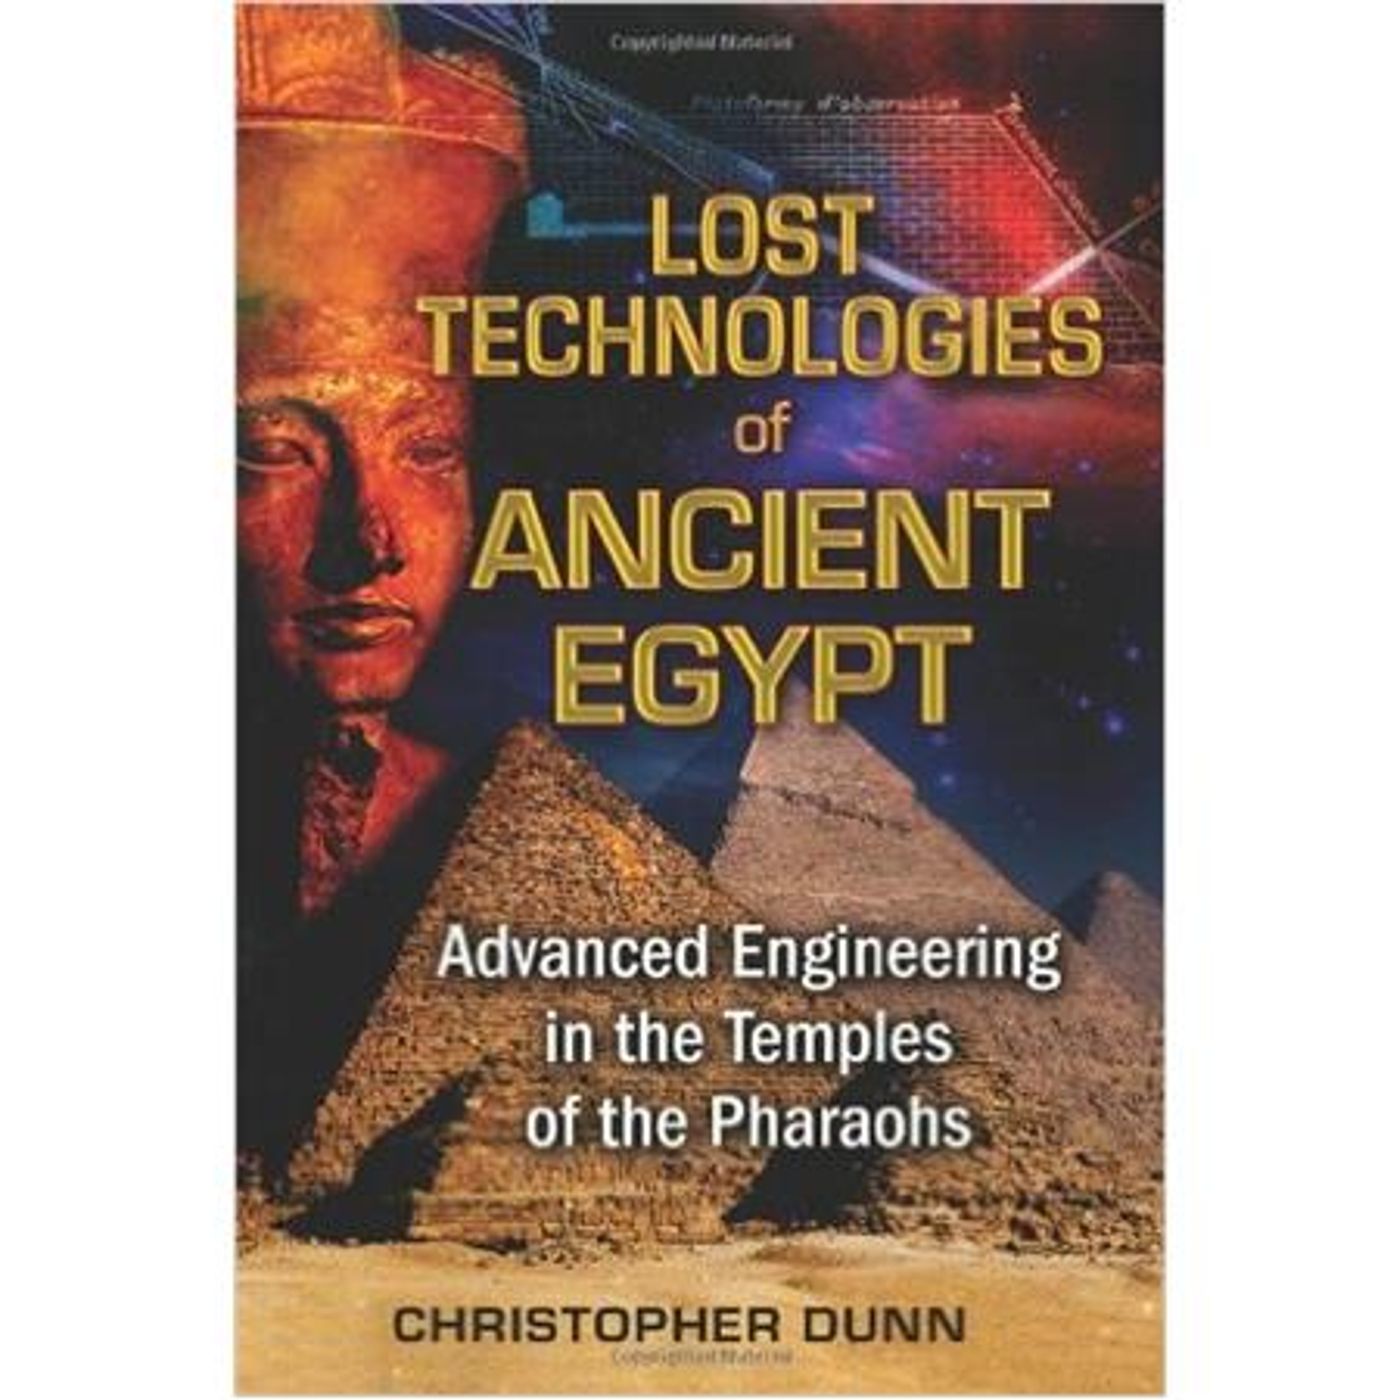 Christopher Dunn: Lost Technology of Ancient Egypt, Part 2